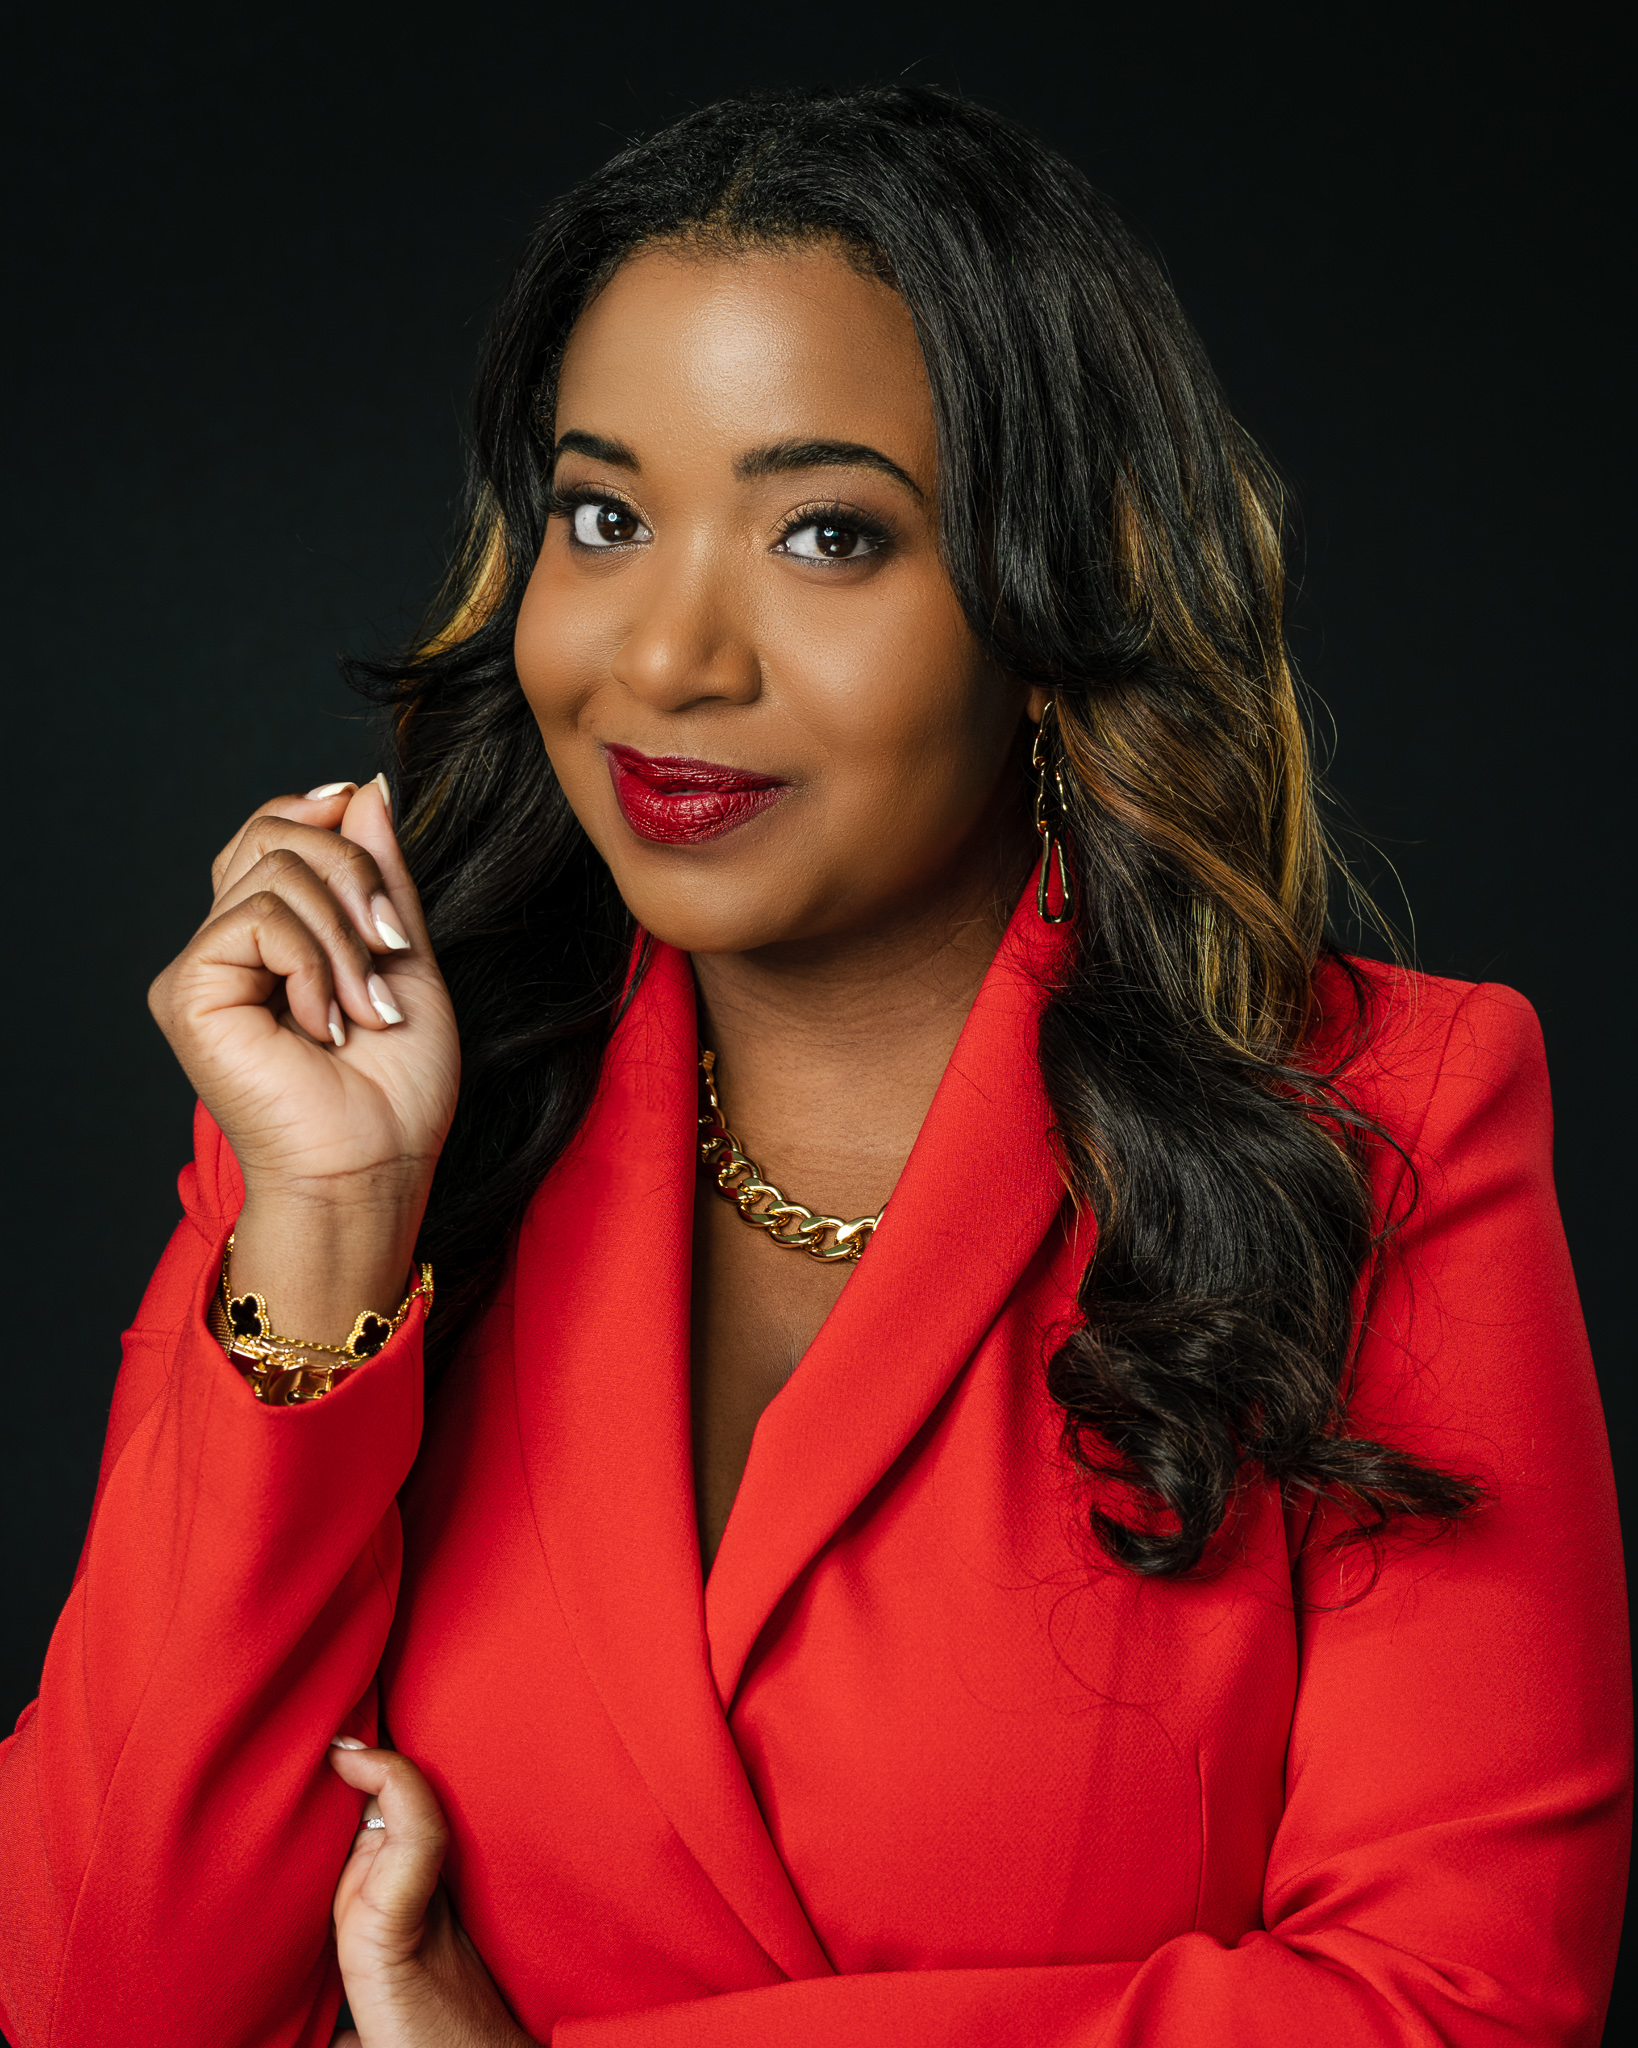 Professional Headshot taken of Client, dressed in a sophisticated red blazer, and against a black background.